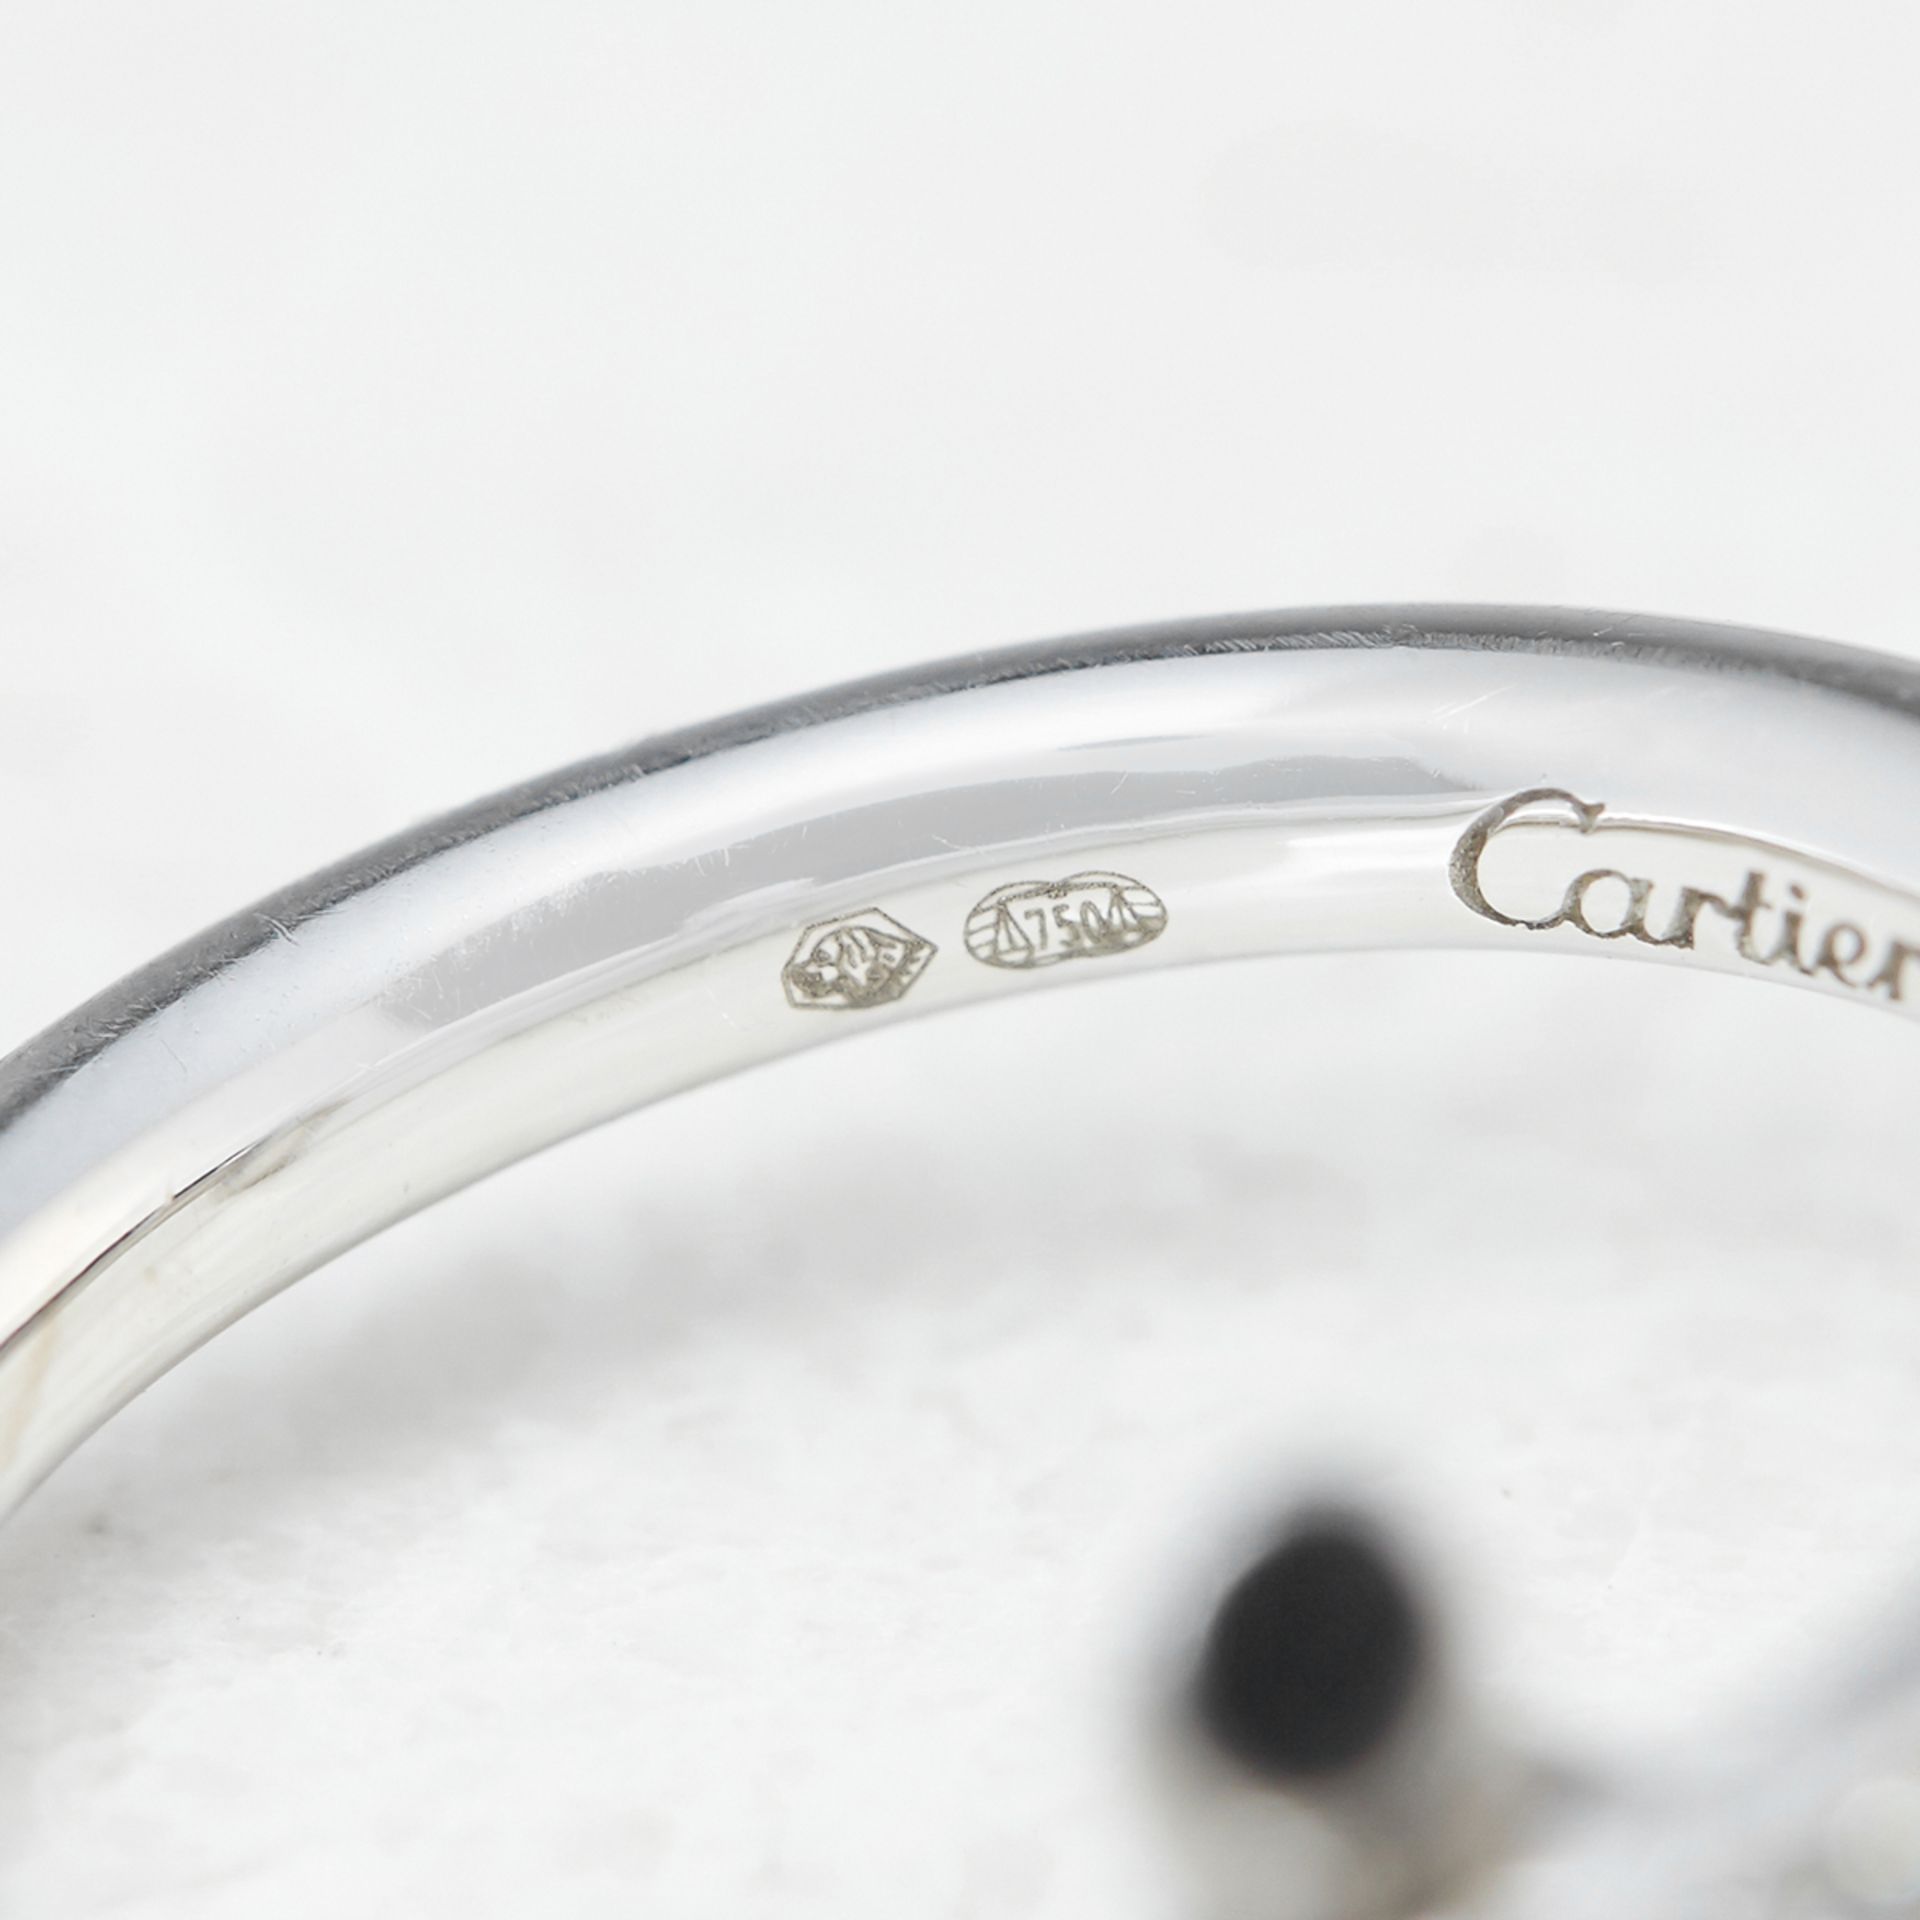 Cartier 18k White Gold 0.32ct Diamond Entrelac's Ring - Image 7 of 9